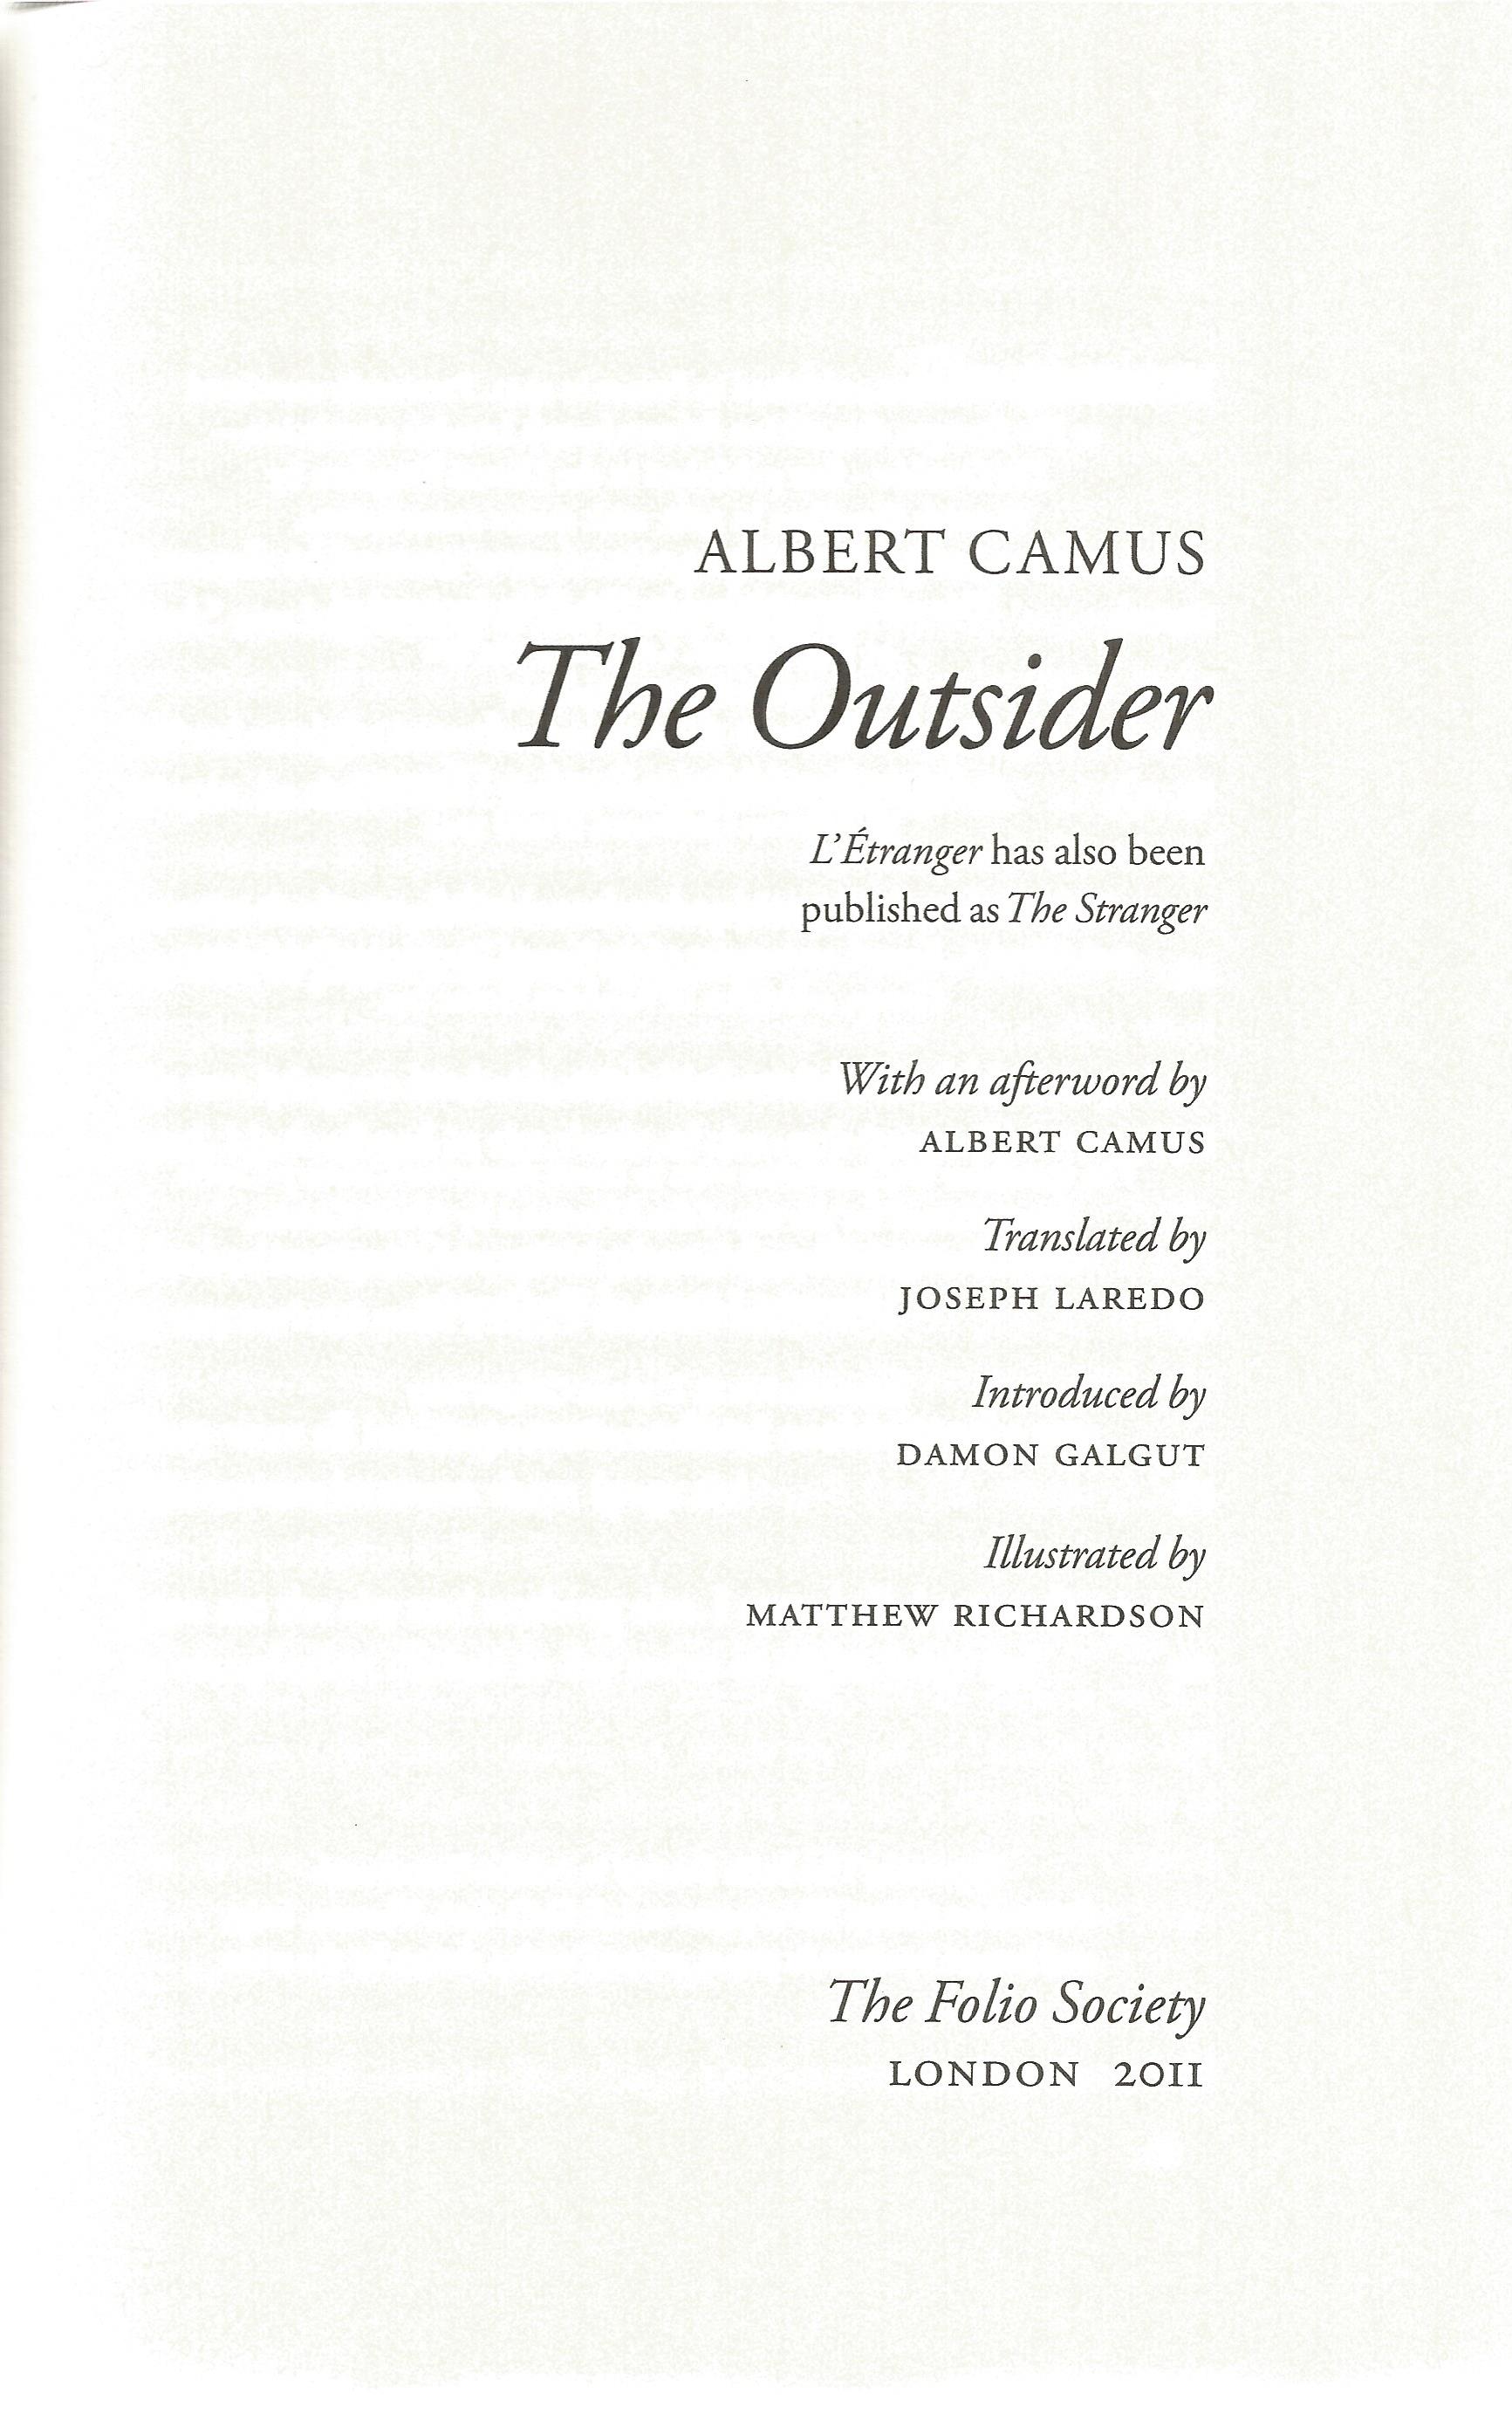 The Outsider by Albert Camus Hardback Book with Slipcase 2011 published by The Folio Society good - Image 2 of 3